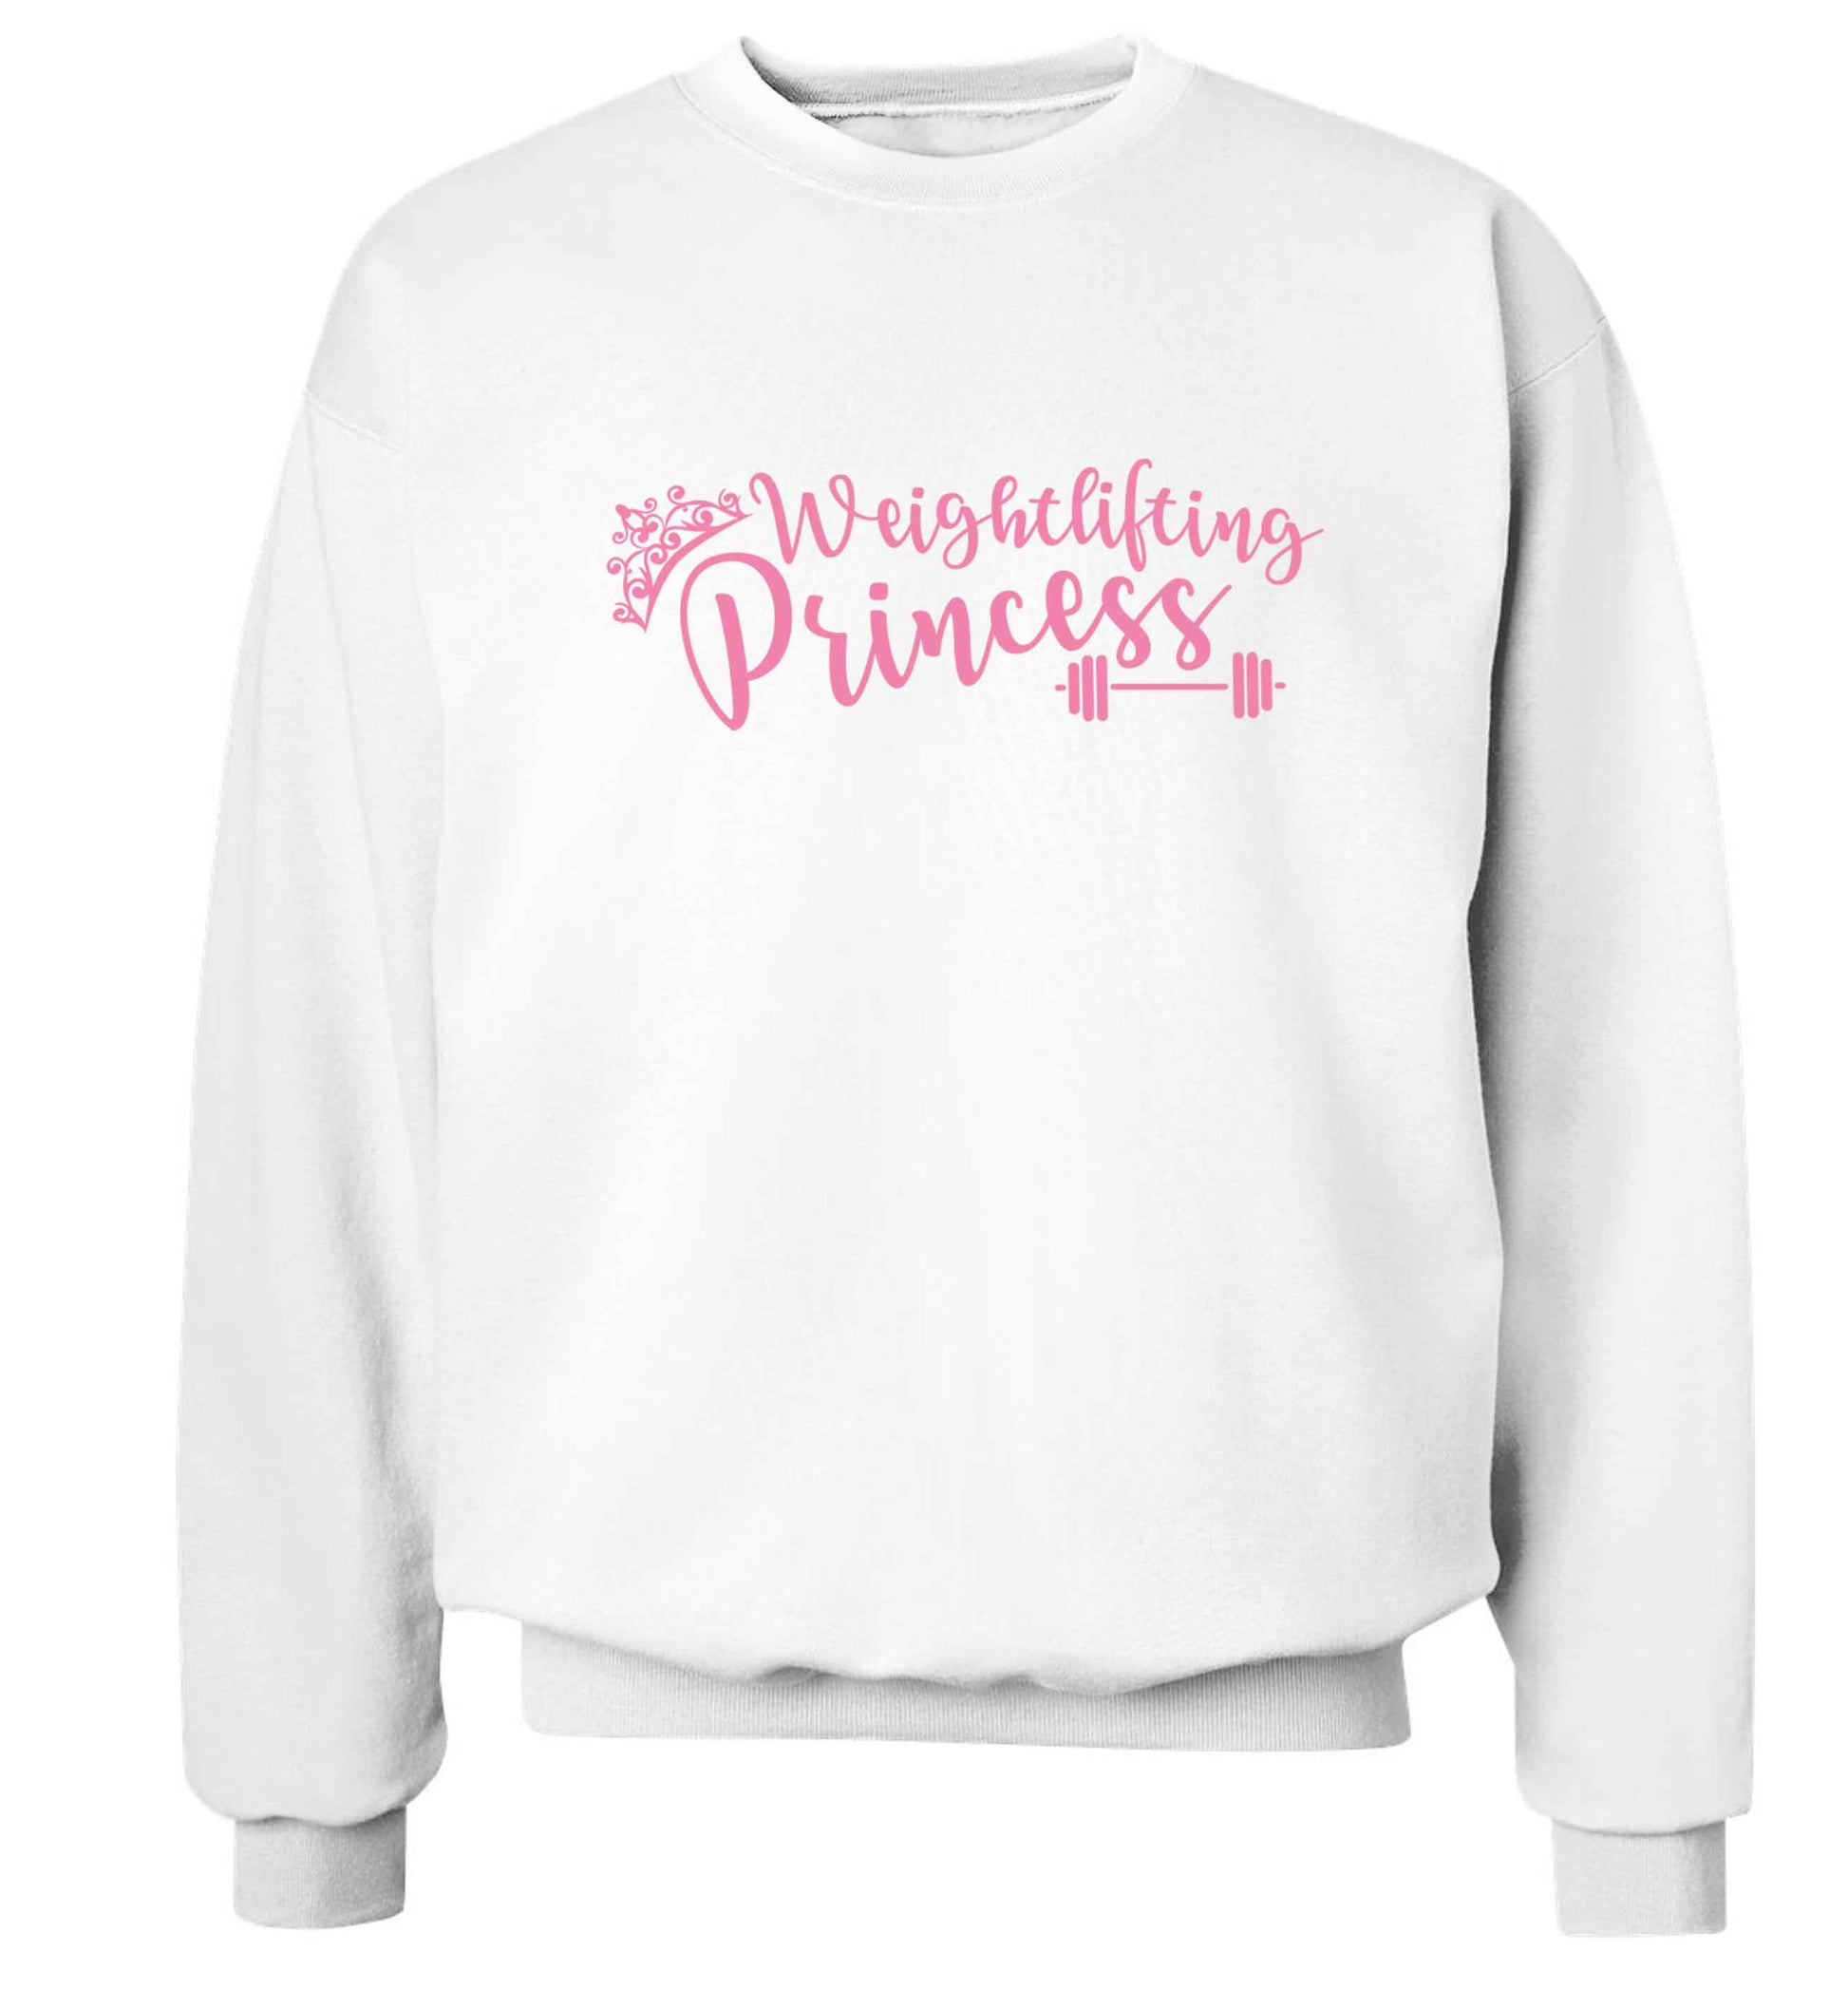 Weightlifting princess Adult's unisex white Sweater 2XL